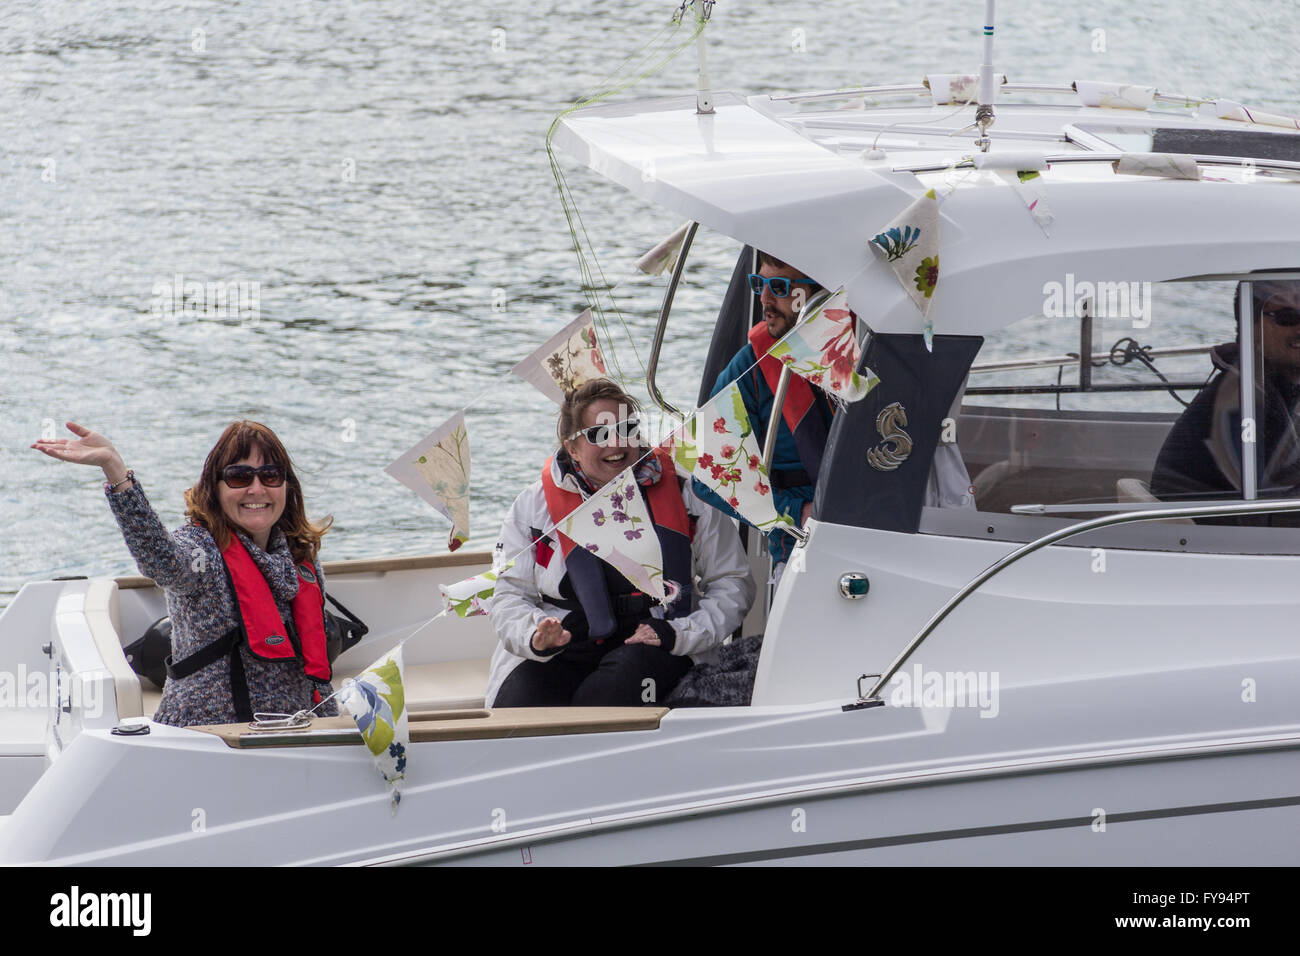 Weymouth, England. 23 April 2016. Queen's 90th Birthday Floating Tribute. Two ladies in boat, smiling and waving. Credit:  Frances Underwood/Alamy Live News Stock Photo